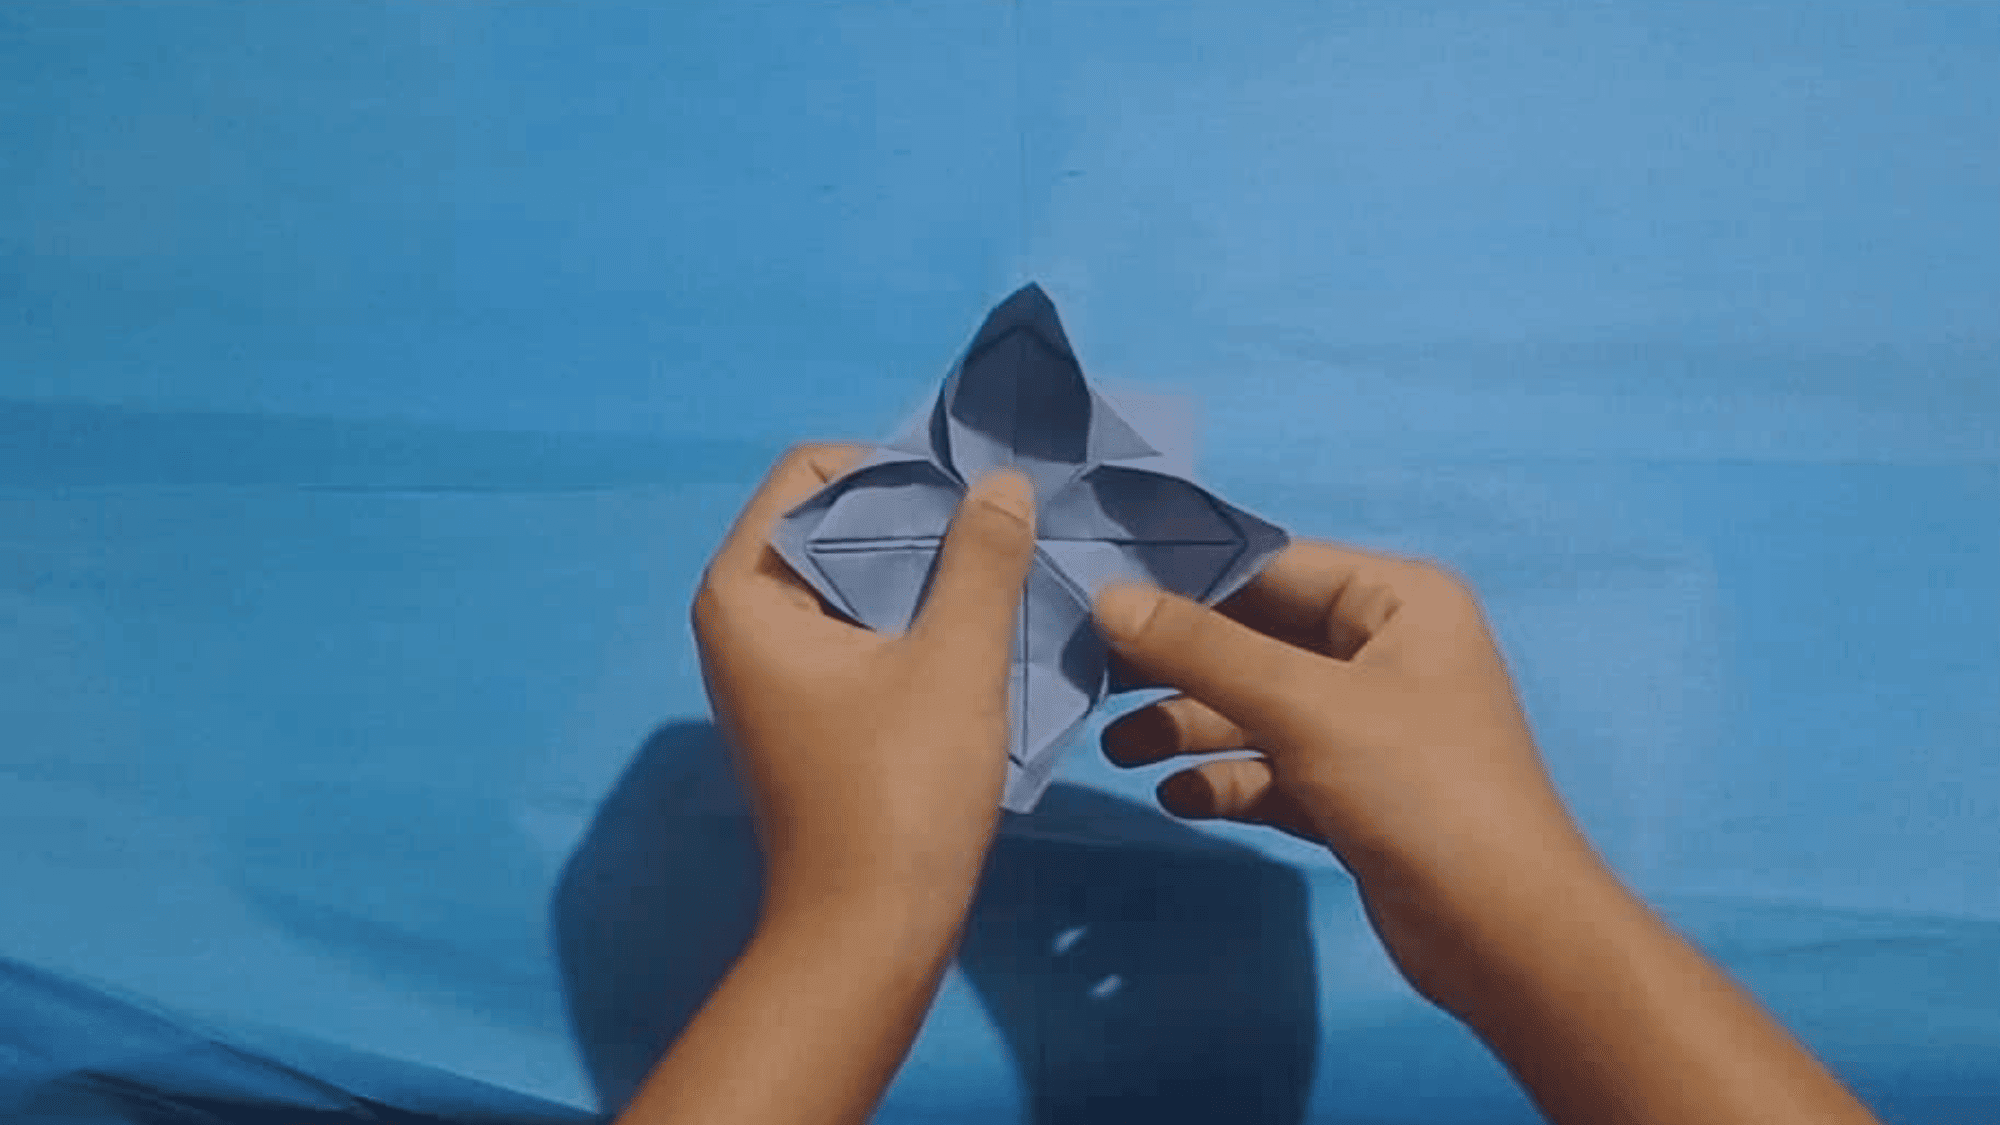 origami lotus flower instructions step 11.2